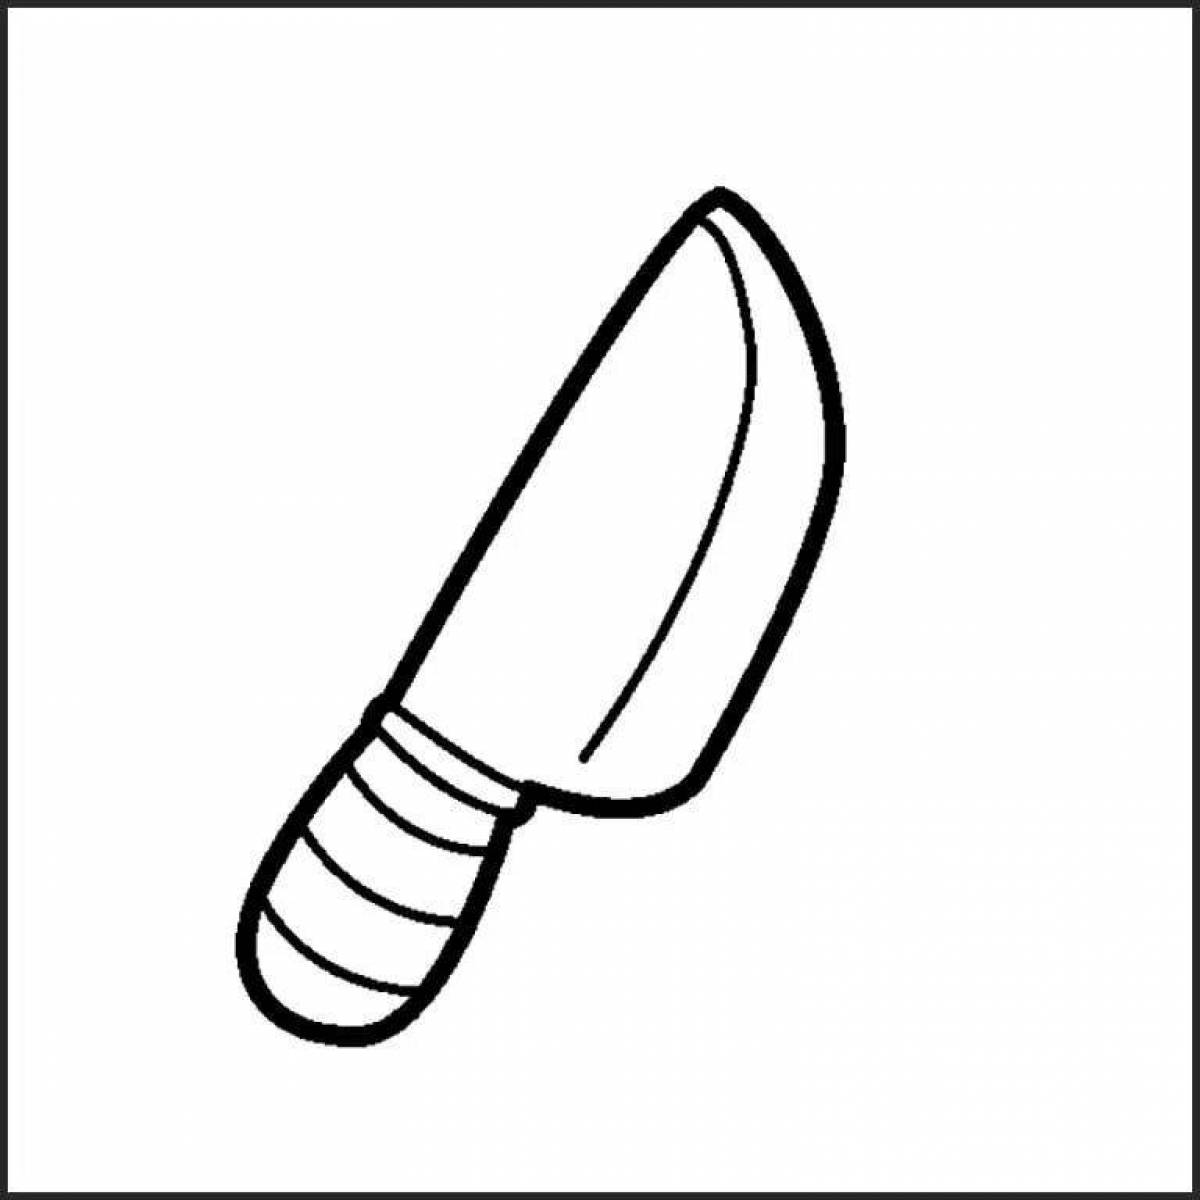 Colorful knife coloring page for kids